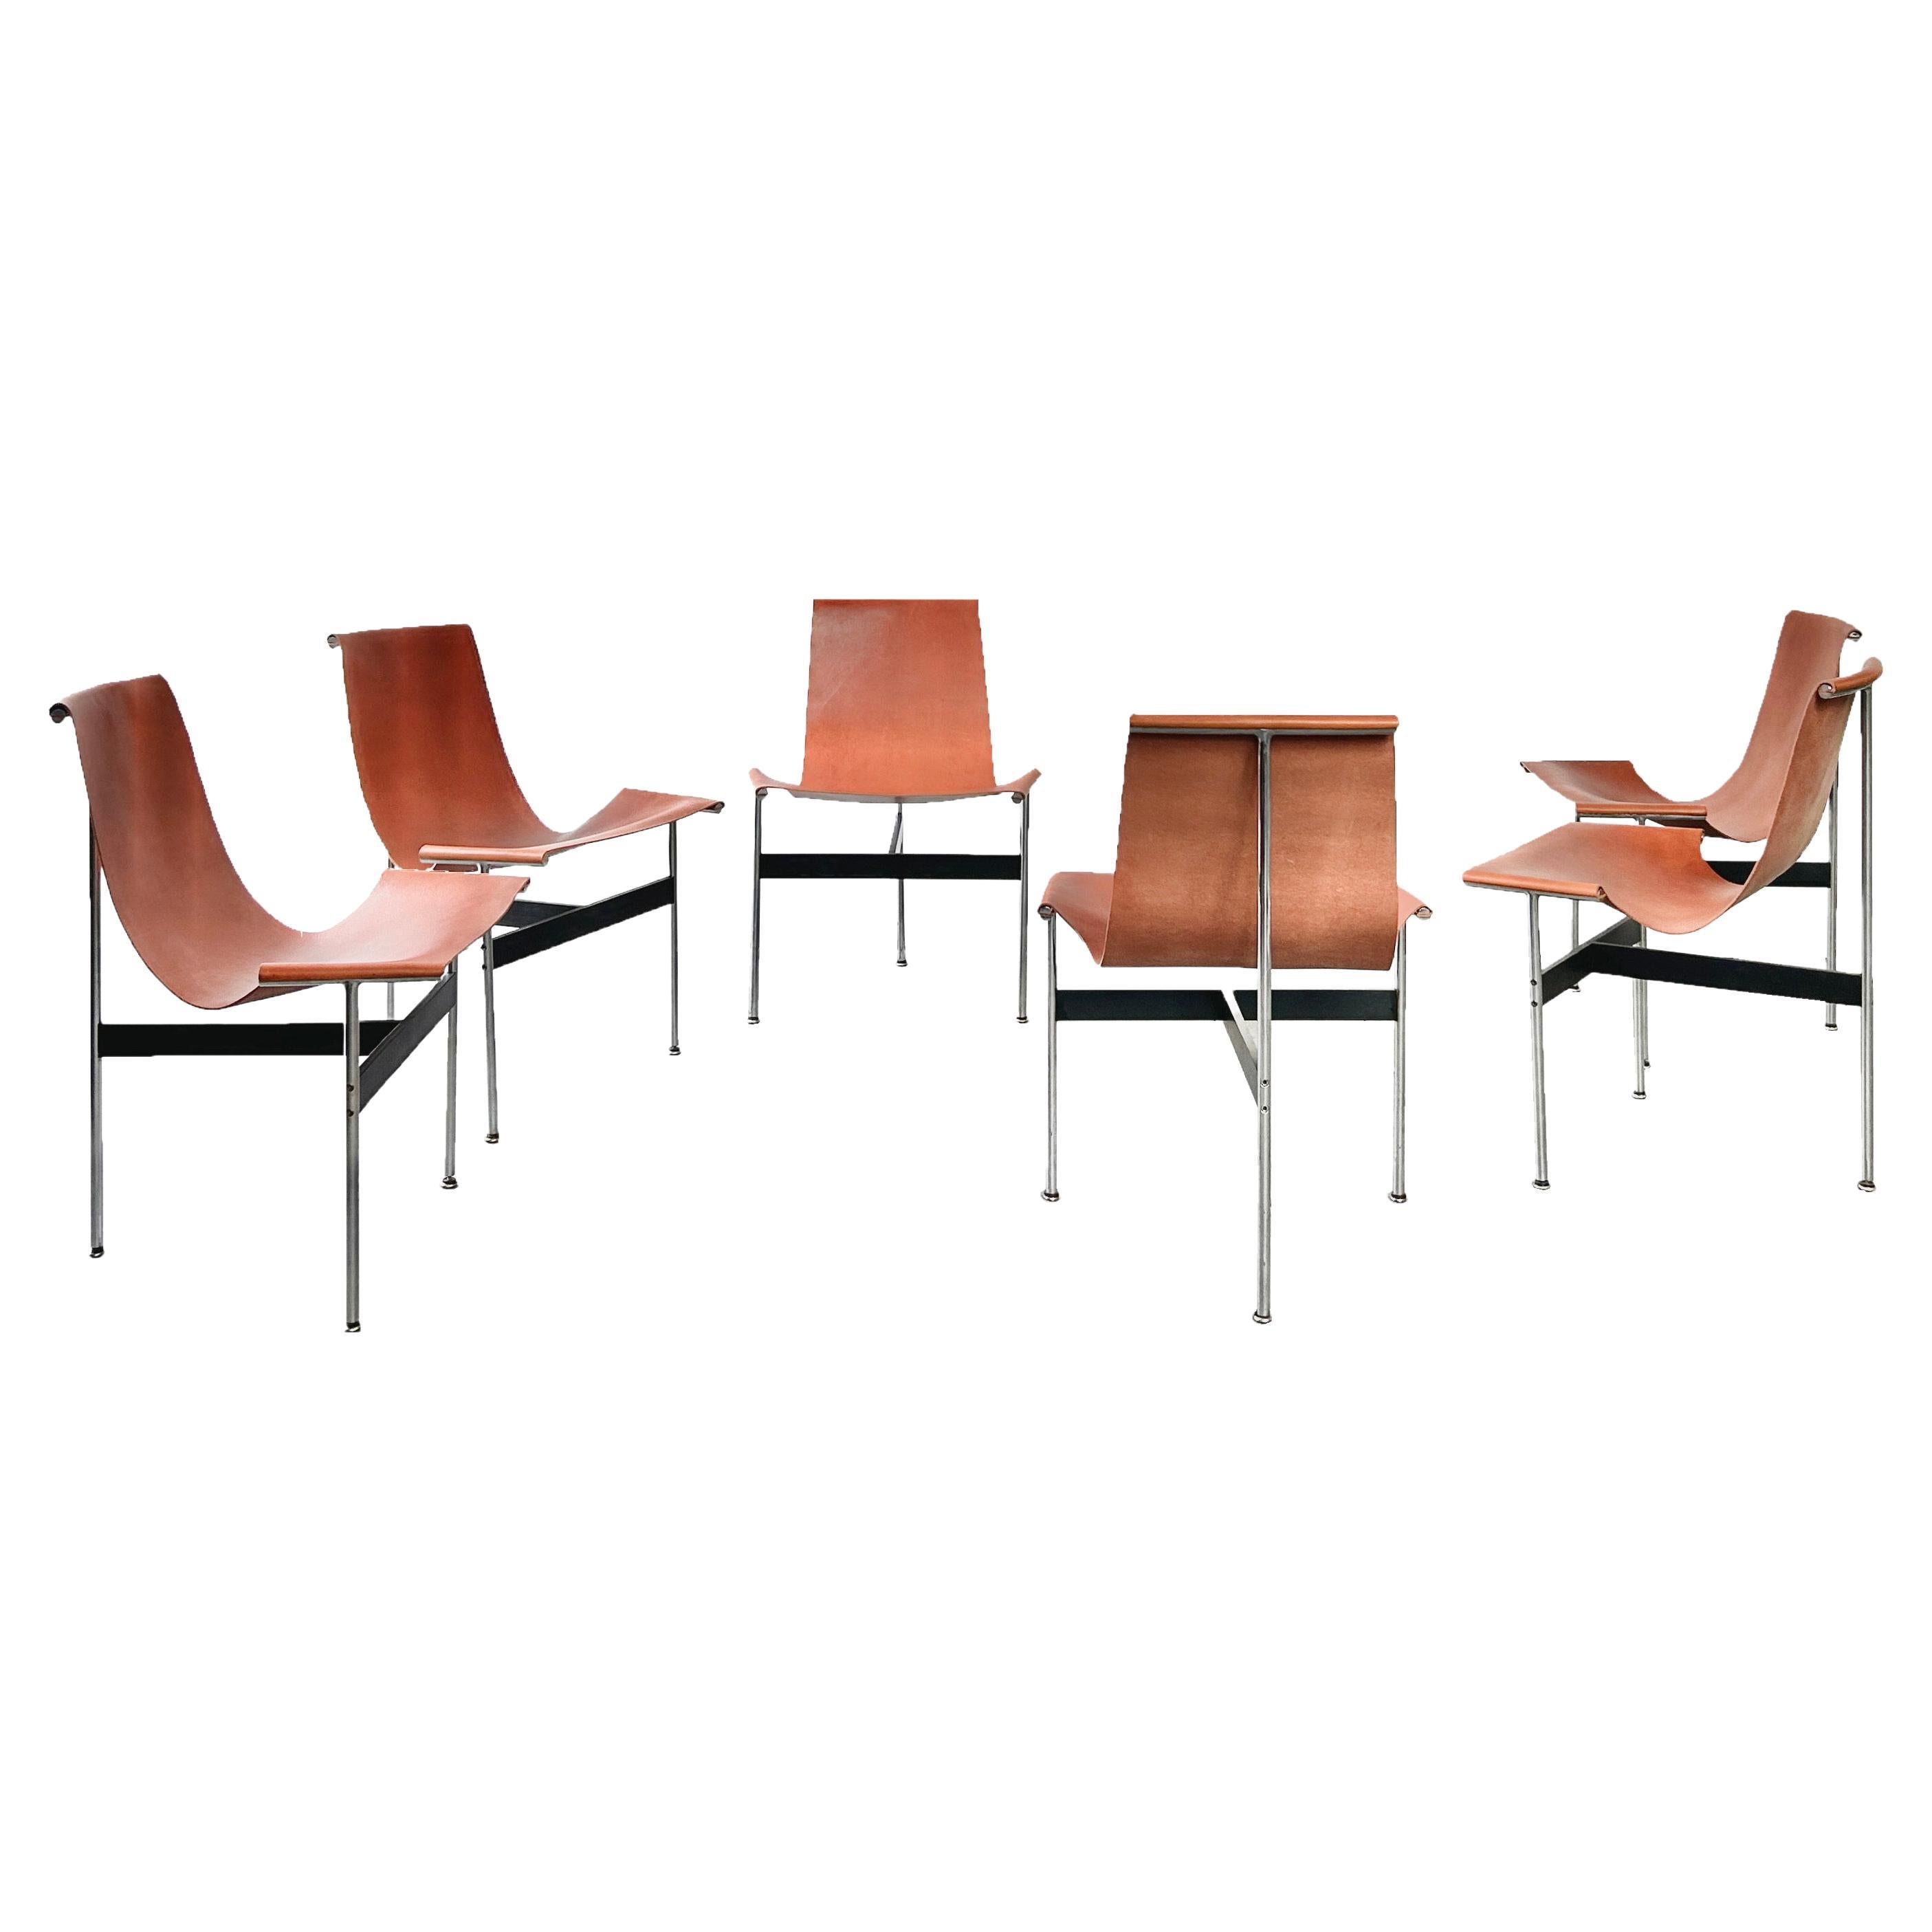 Set of 6 T-chairs designed by Katavolos Litell & Kelley in 1952 For Sale